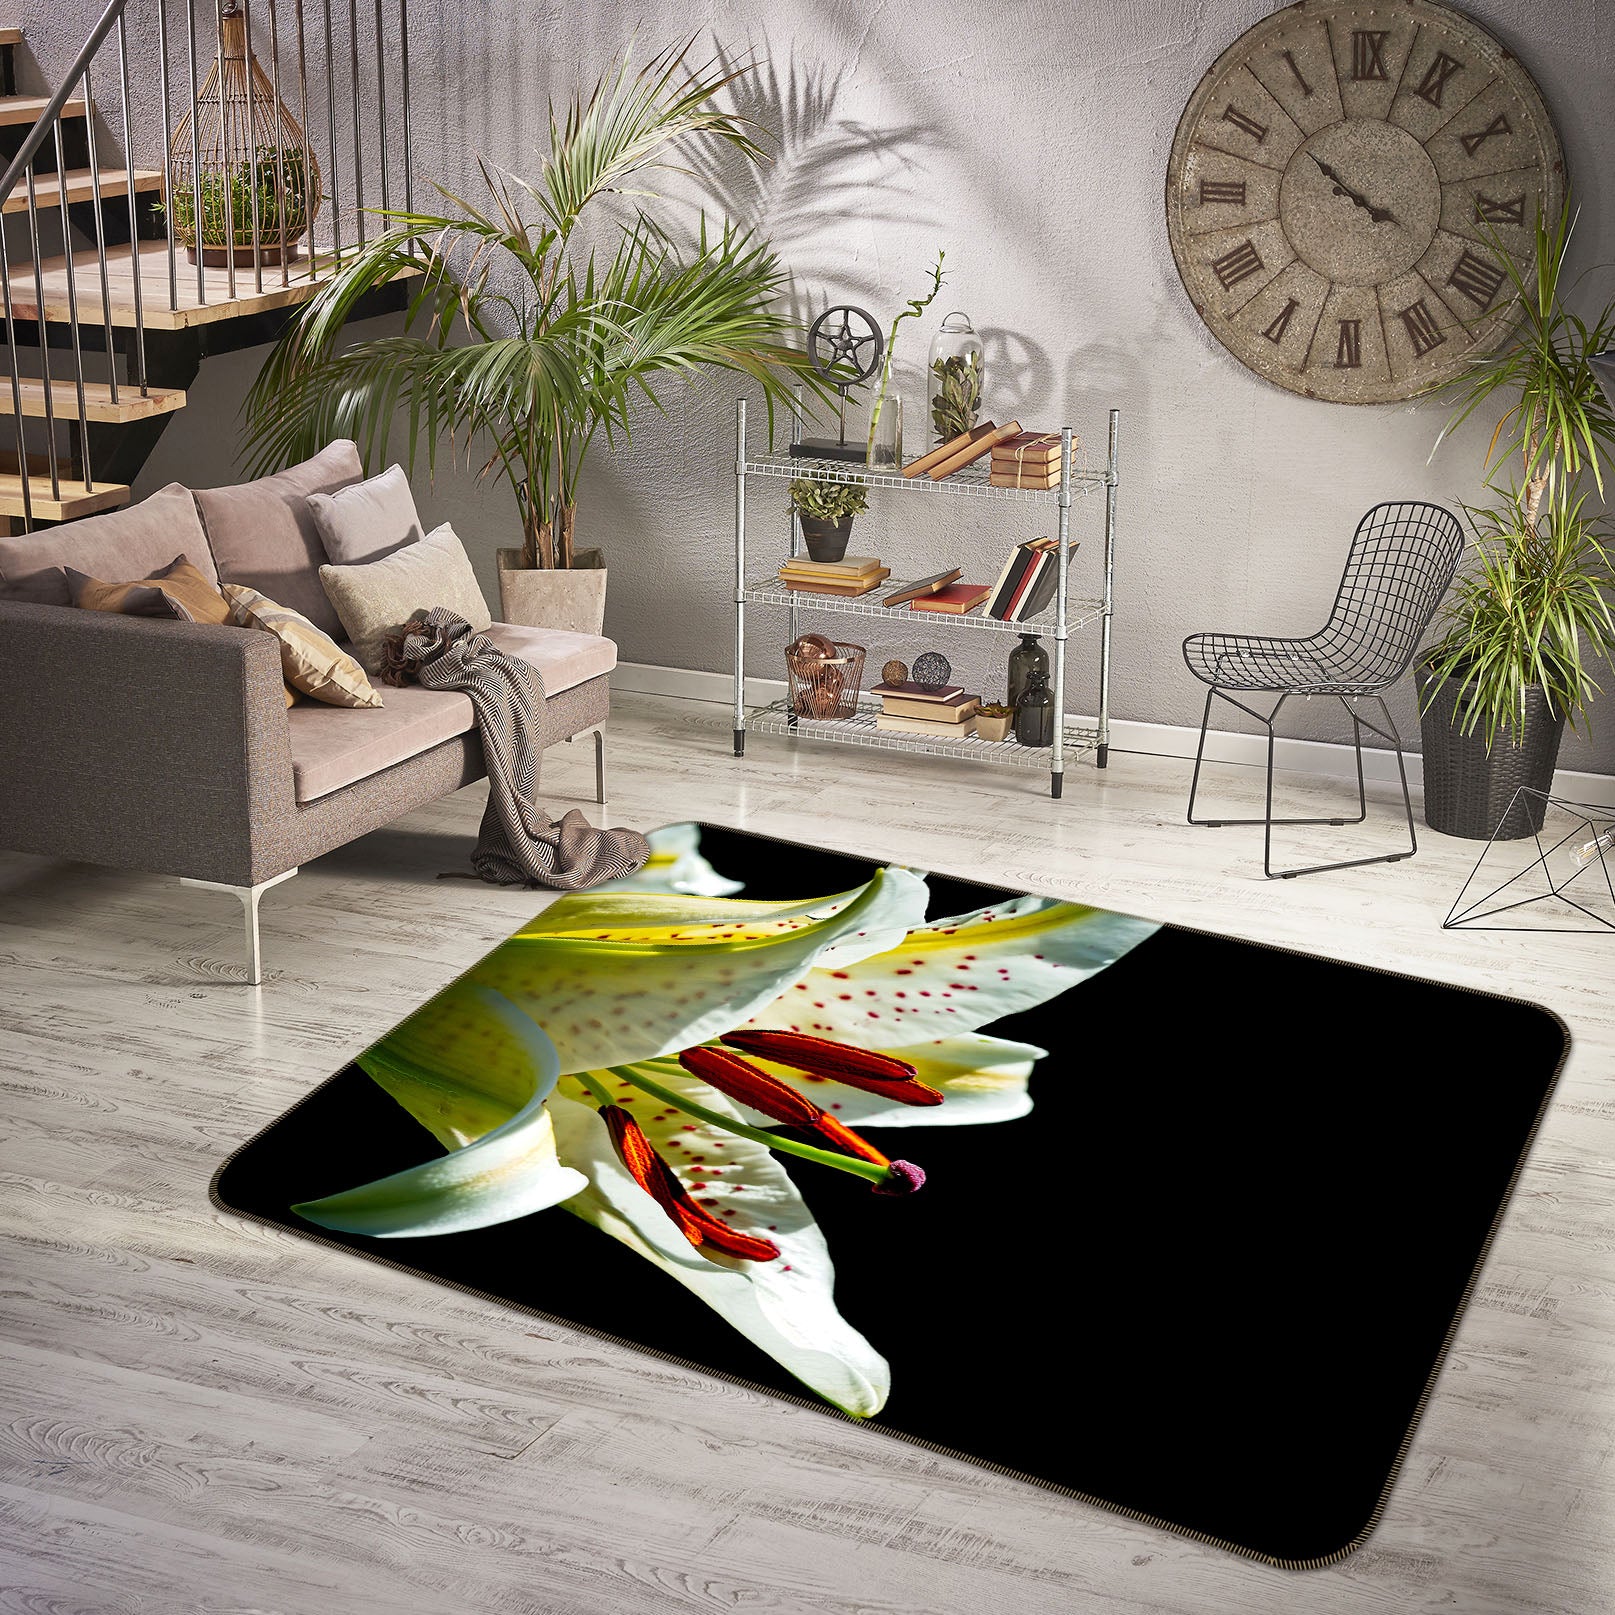 3D Lily Blossoms 1130 Kathy Barefield Rug Non Slip Rug Mat